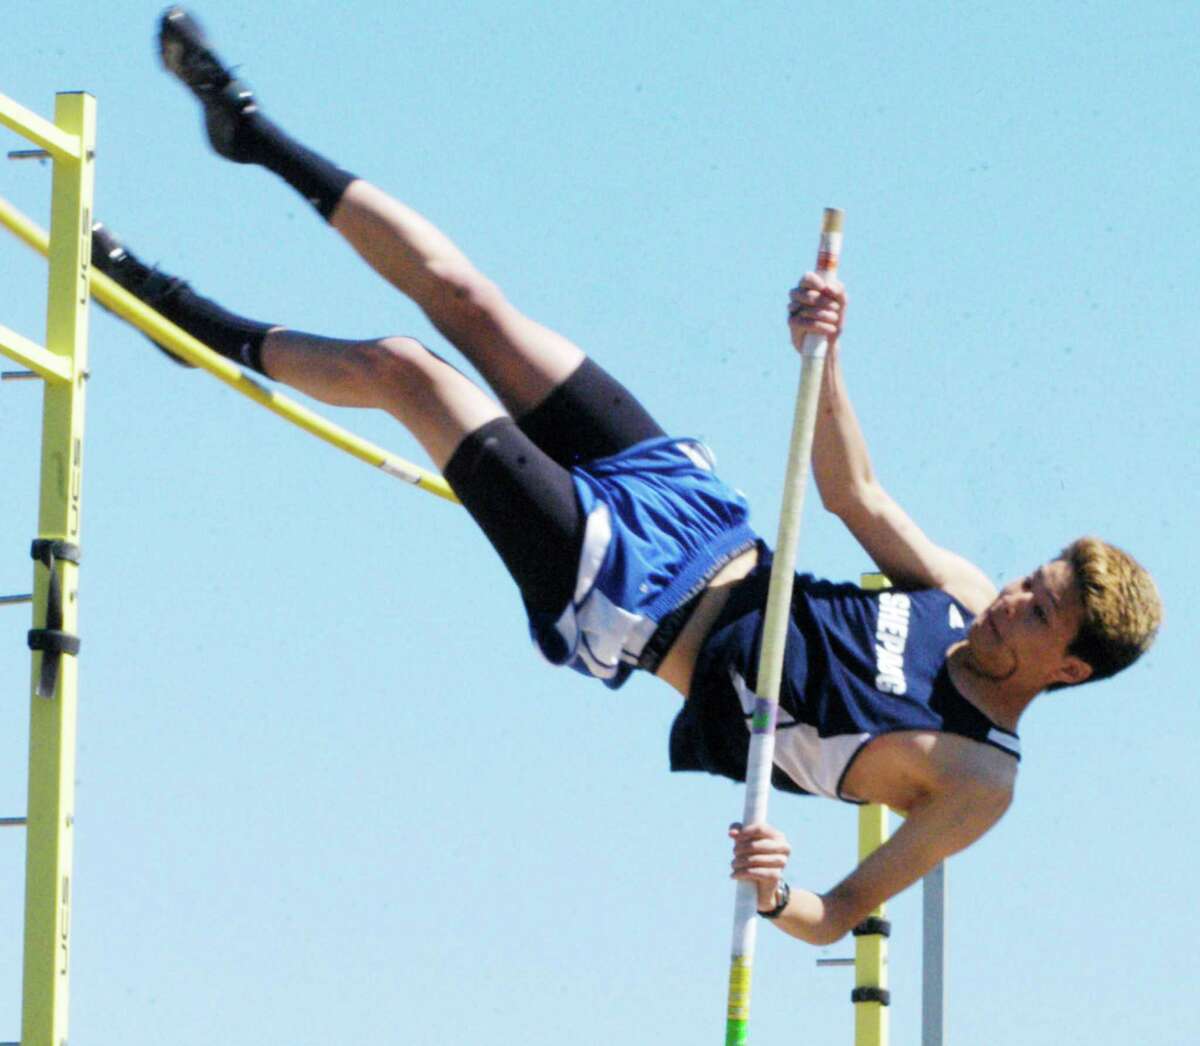 Spartan senior Nathan Ong shrugs off injury to score points in the pole vault for the Shepaug Valley High School boys' track and field team at the Berkshire League championship meet, May 17, 2014 in Litchfield.